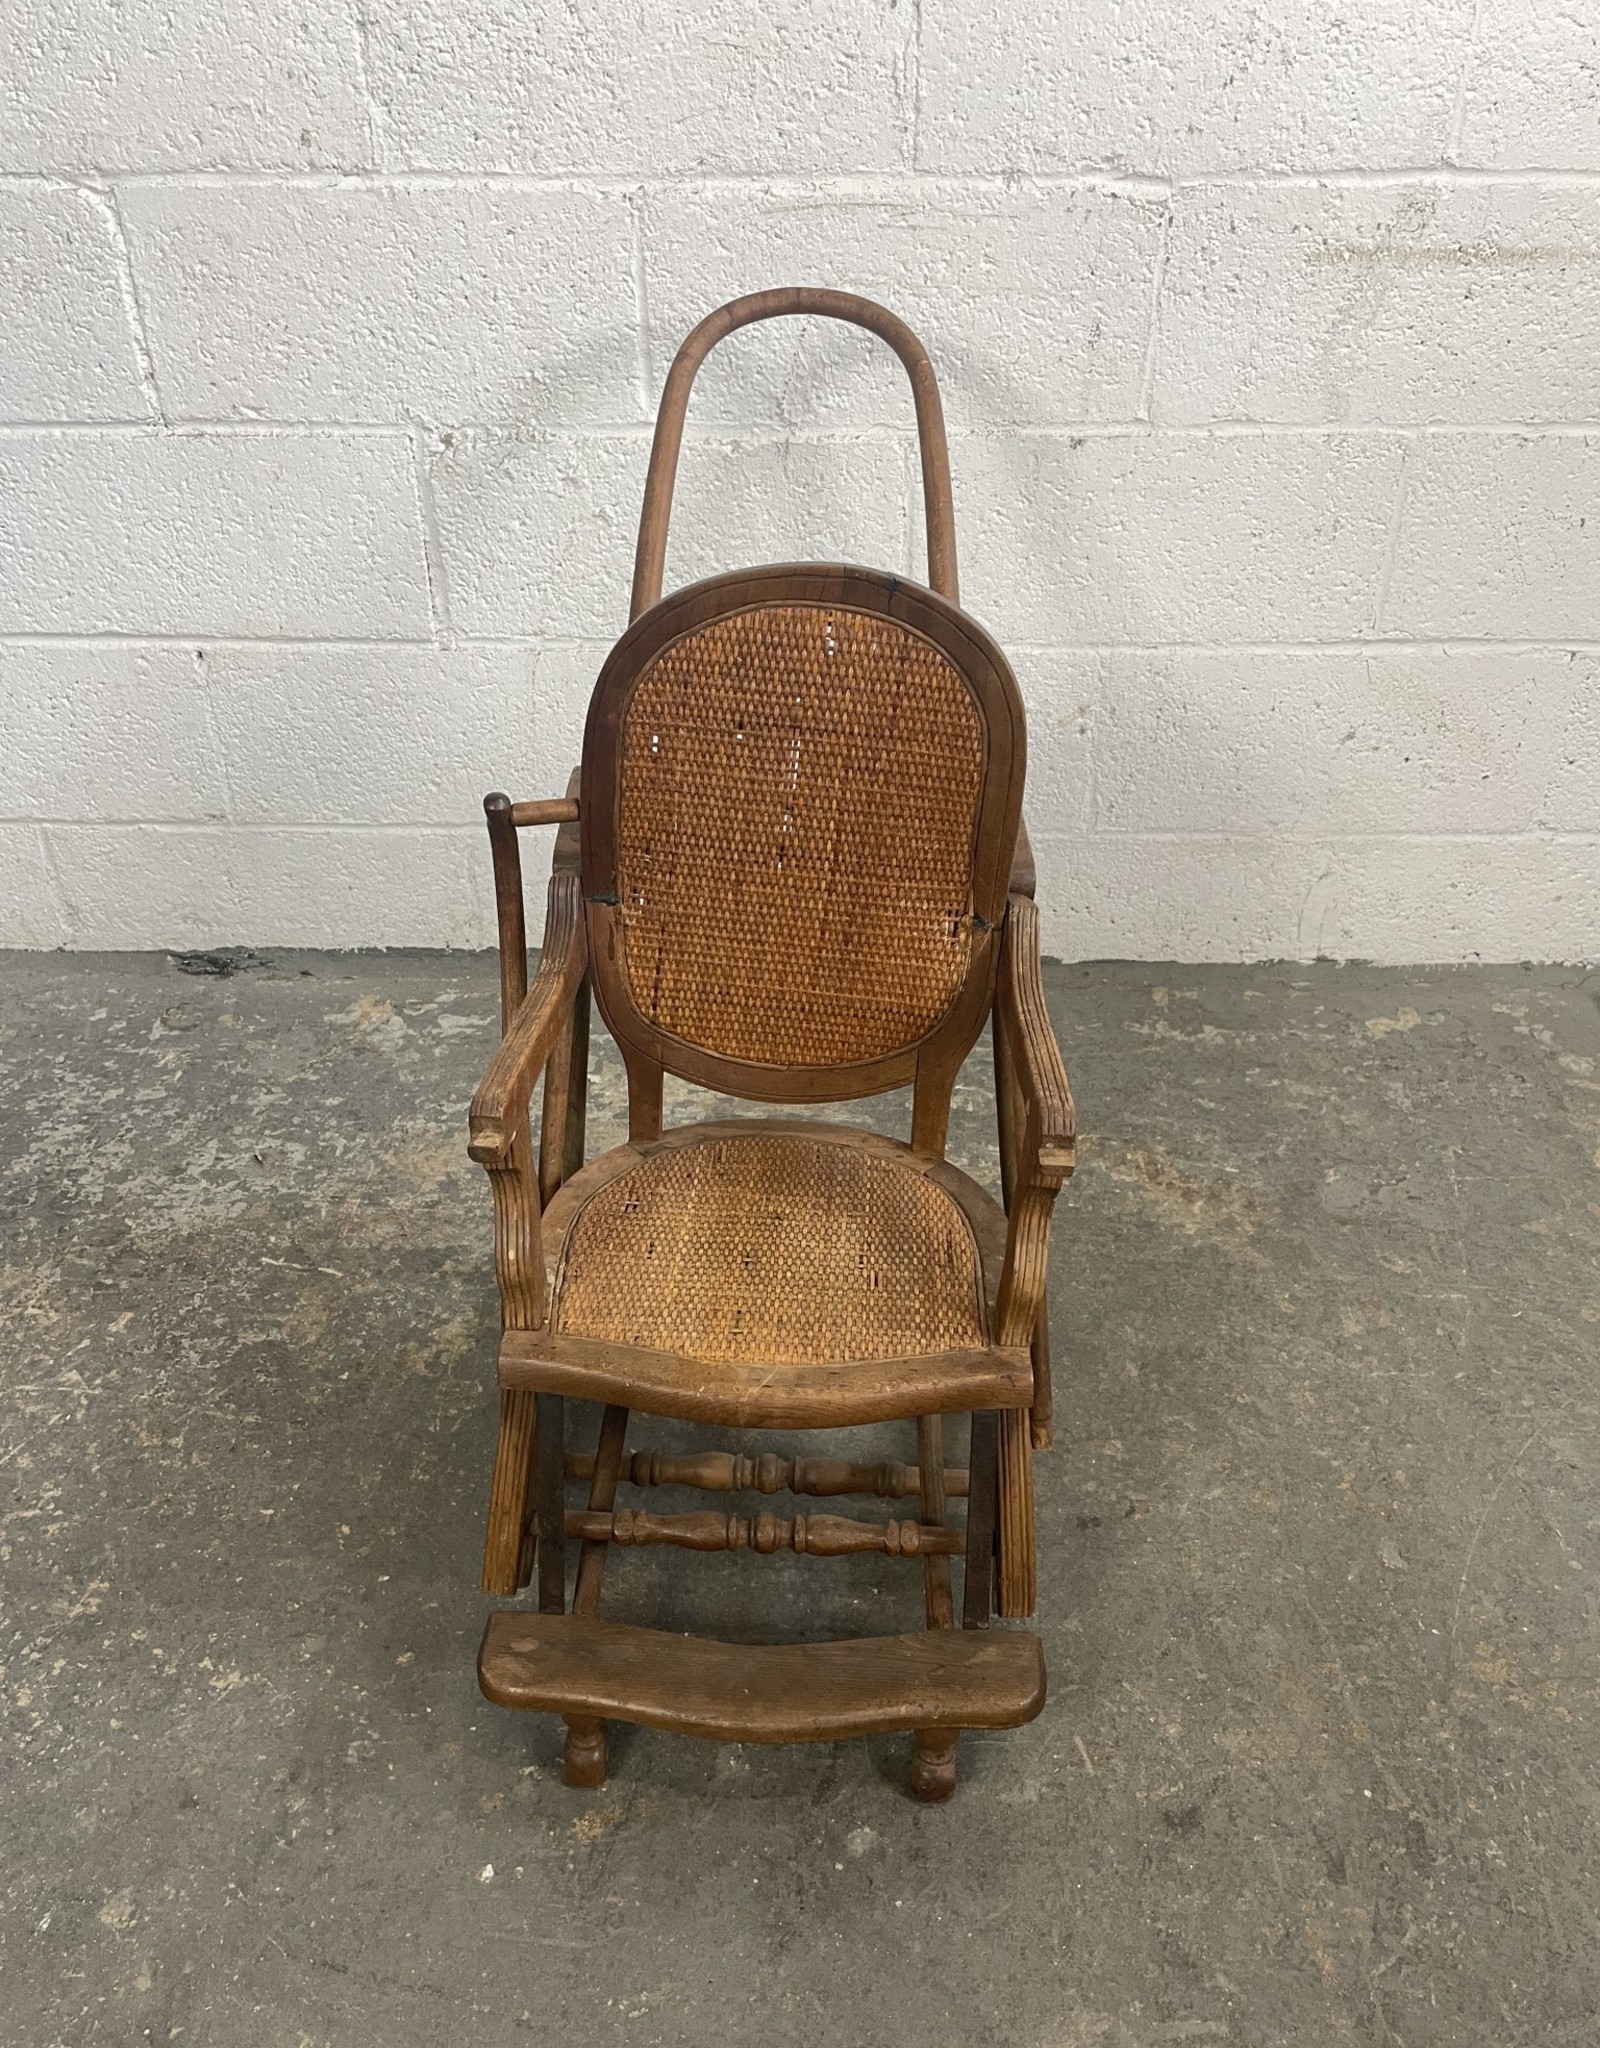 Antique Wooden Convertible Child's High Chair